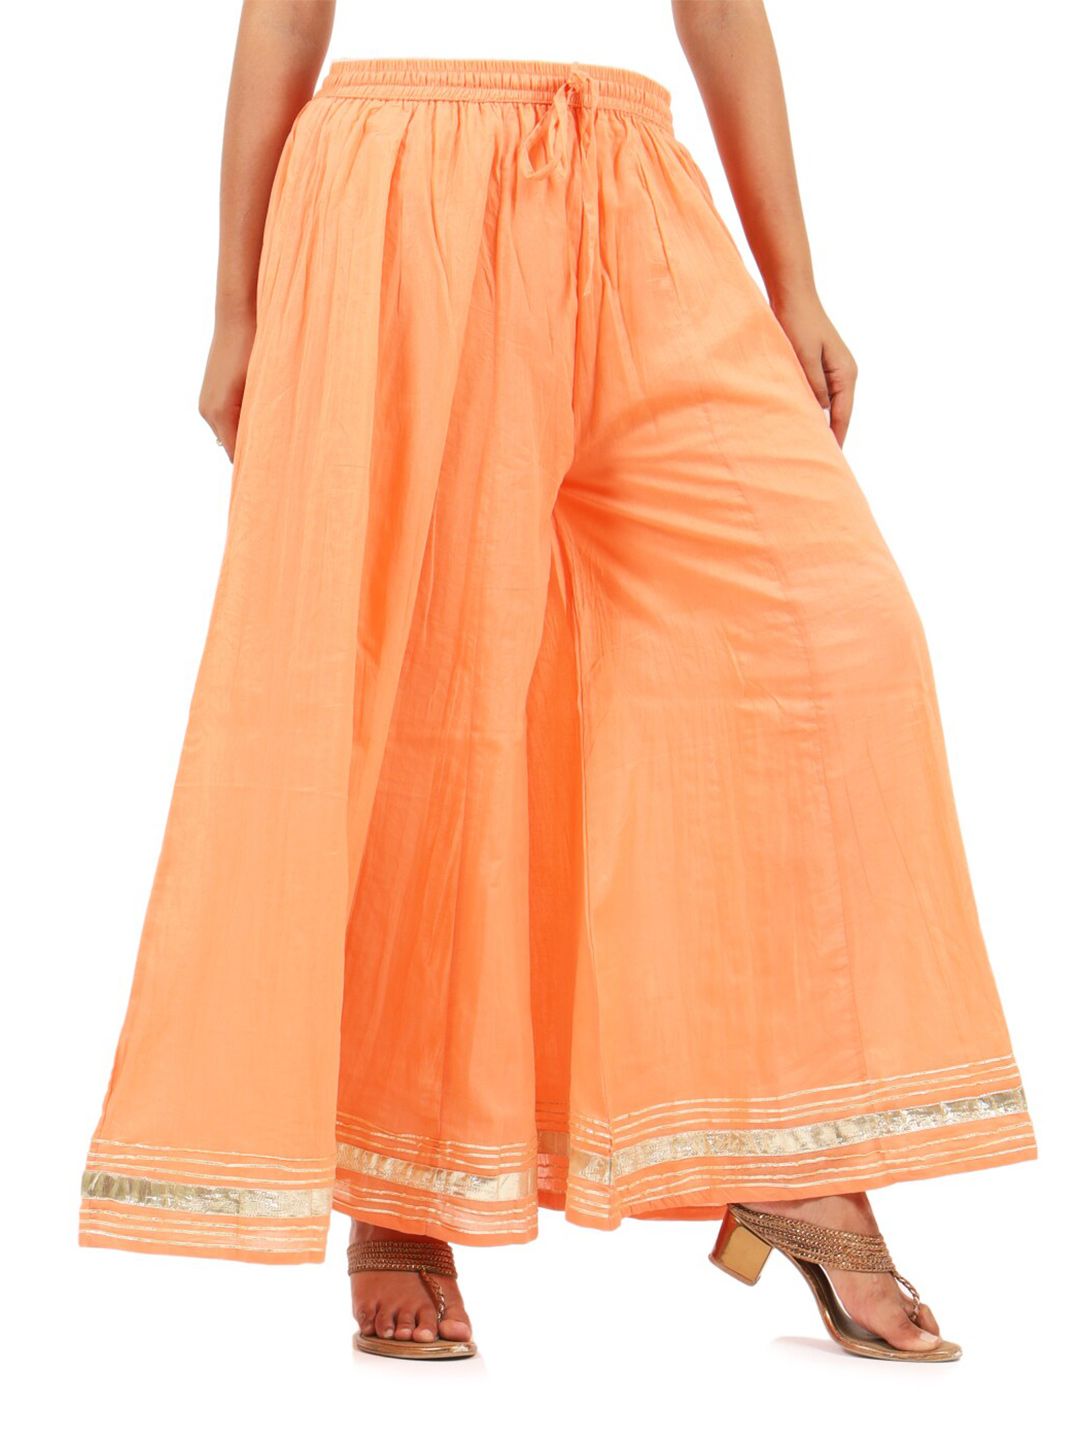 Swasti Women Peach-Coloured & Gold-Toned Floral Flared Lace Ethnic Palazzos Price in India